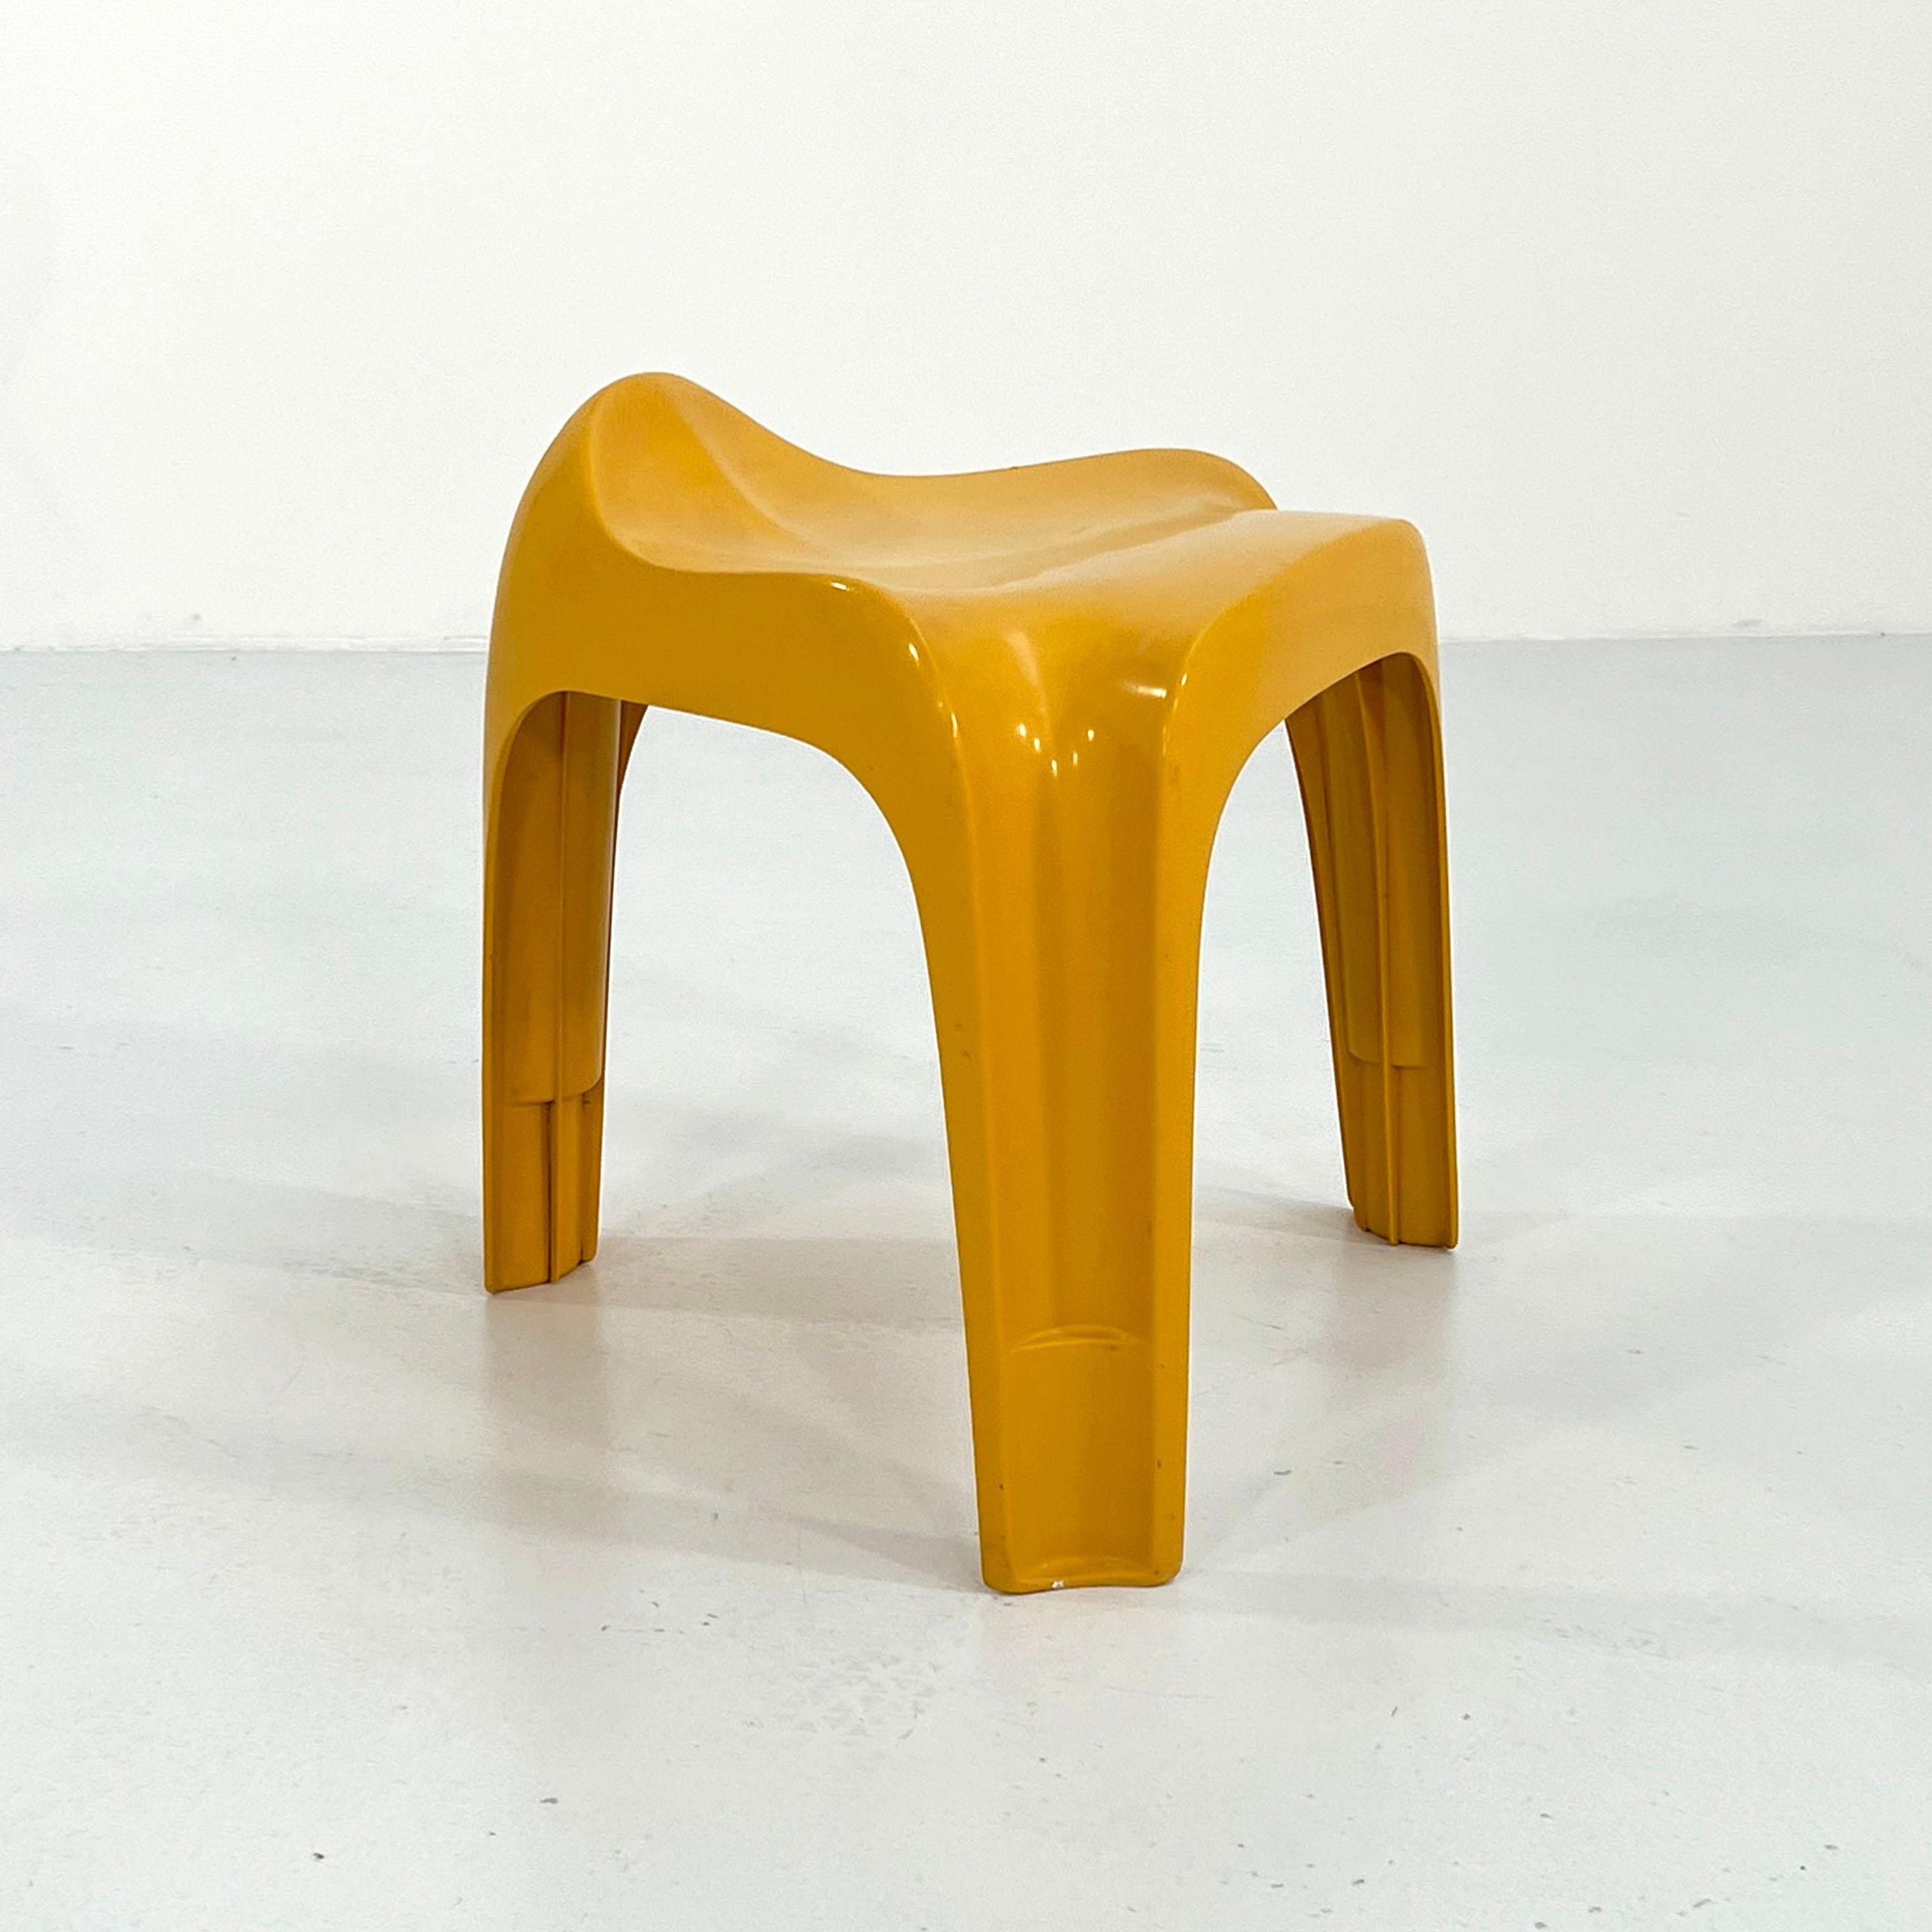 Stool by Alexander Begge for Casala, 1970s
Designer - Alexander Begge
Producer - Casala
Design Period - Seventies
Measurements - Width 47 cm x Depth 42 cm x Height 49 cm x Seat Height 43 cm
Materials - Plastic
Color - Yellow
??????Condition -